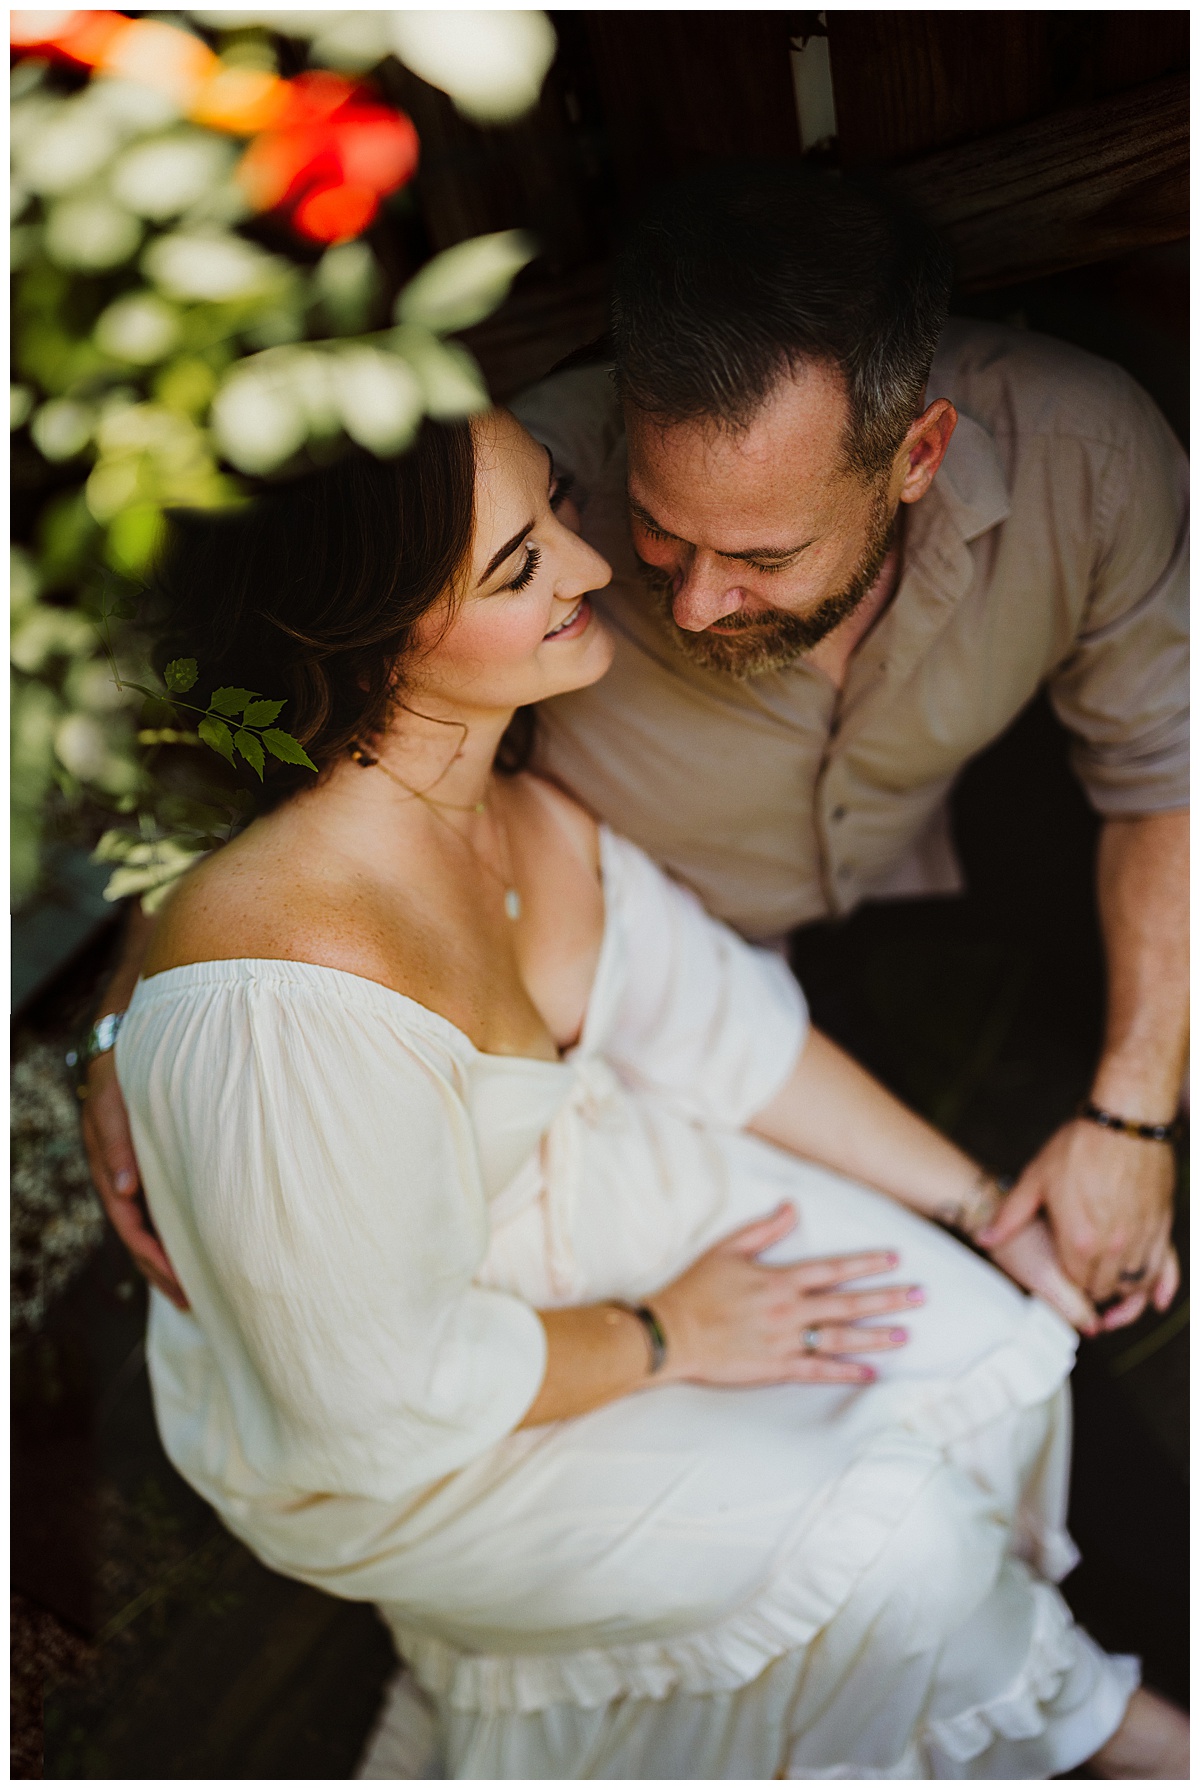 Mom and dad smile together for their Virginia Maternity Photographer